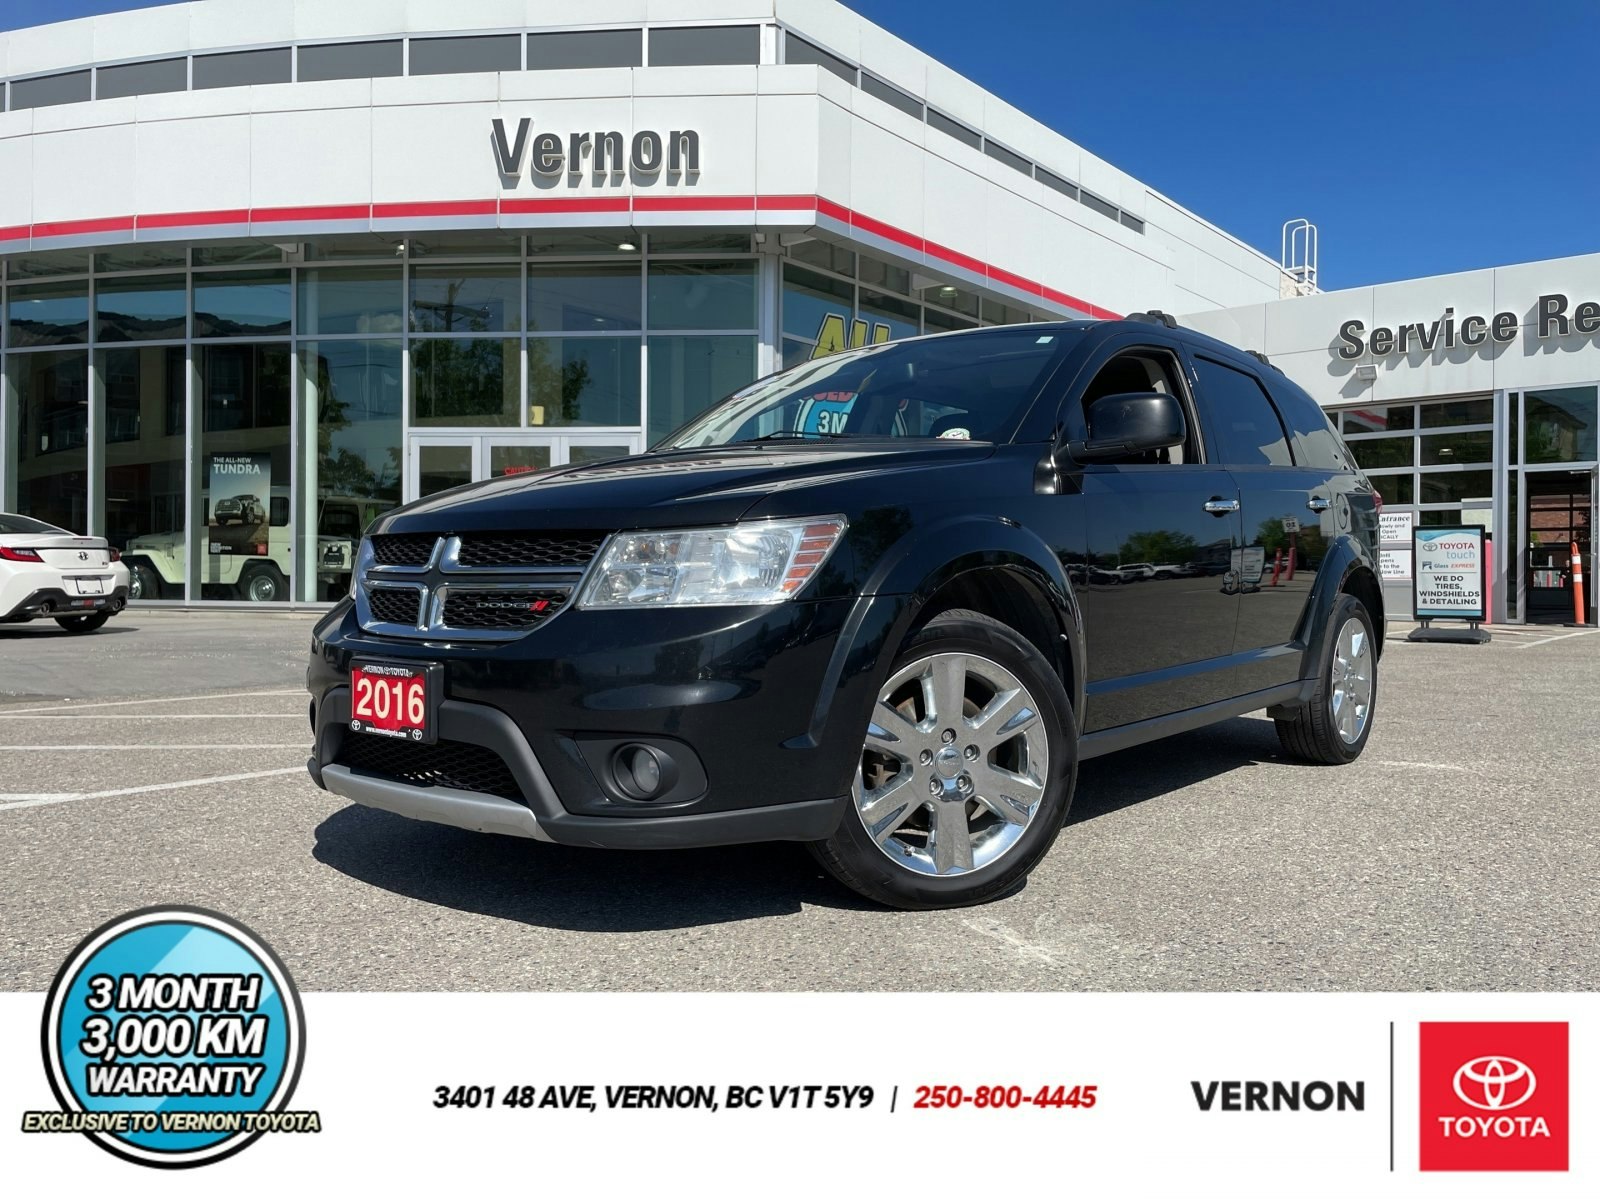 2016 Dodge Journey R/T AWD | DVD PLAYER | HEATED SEATS (F0010A) Main Image